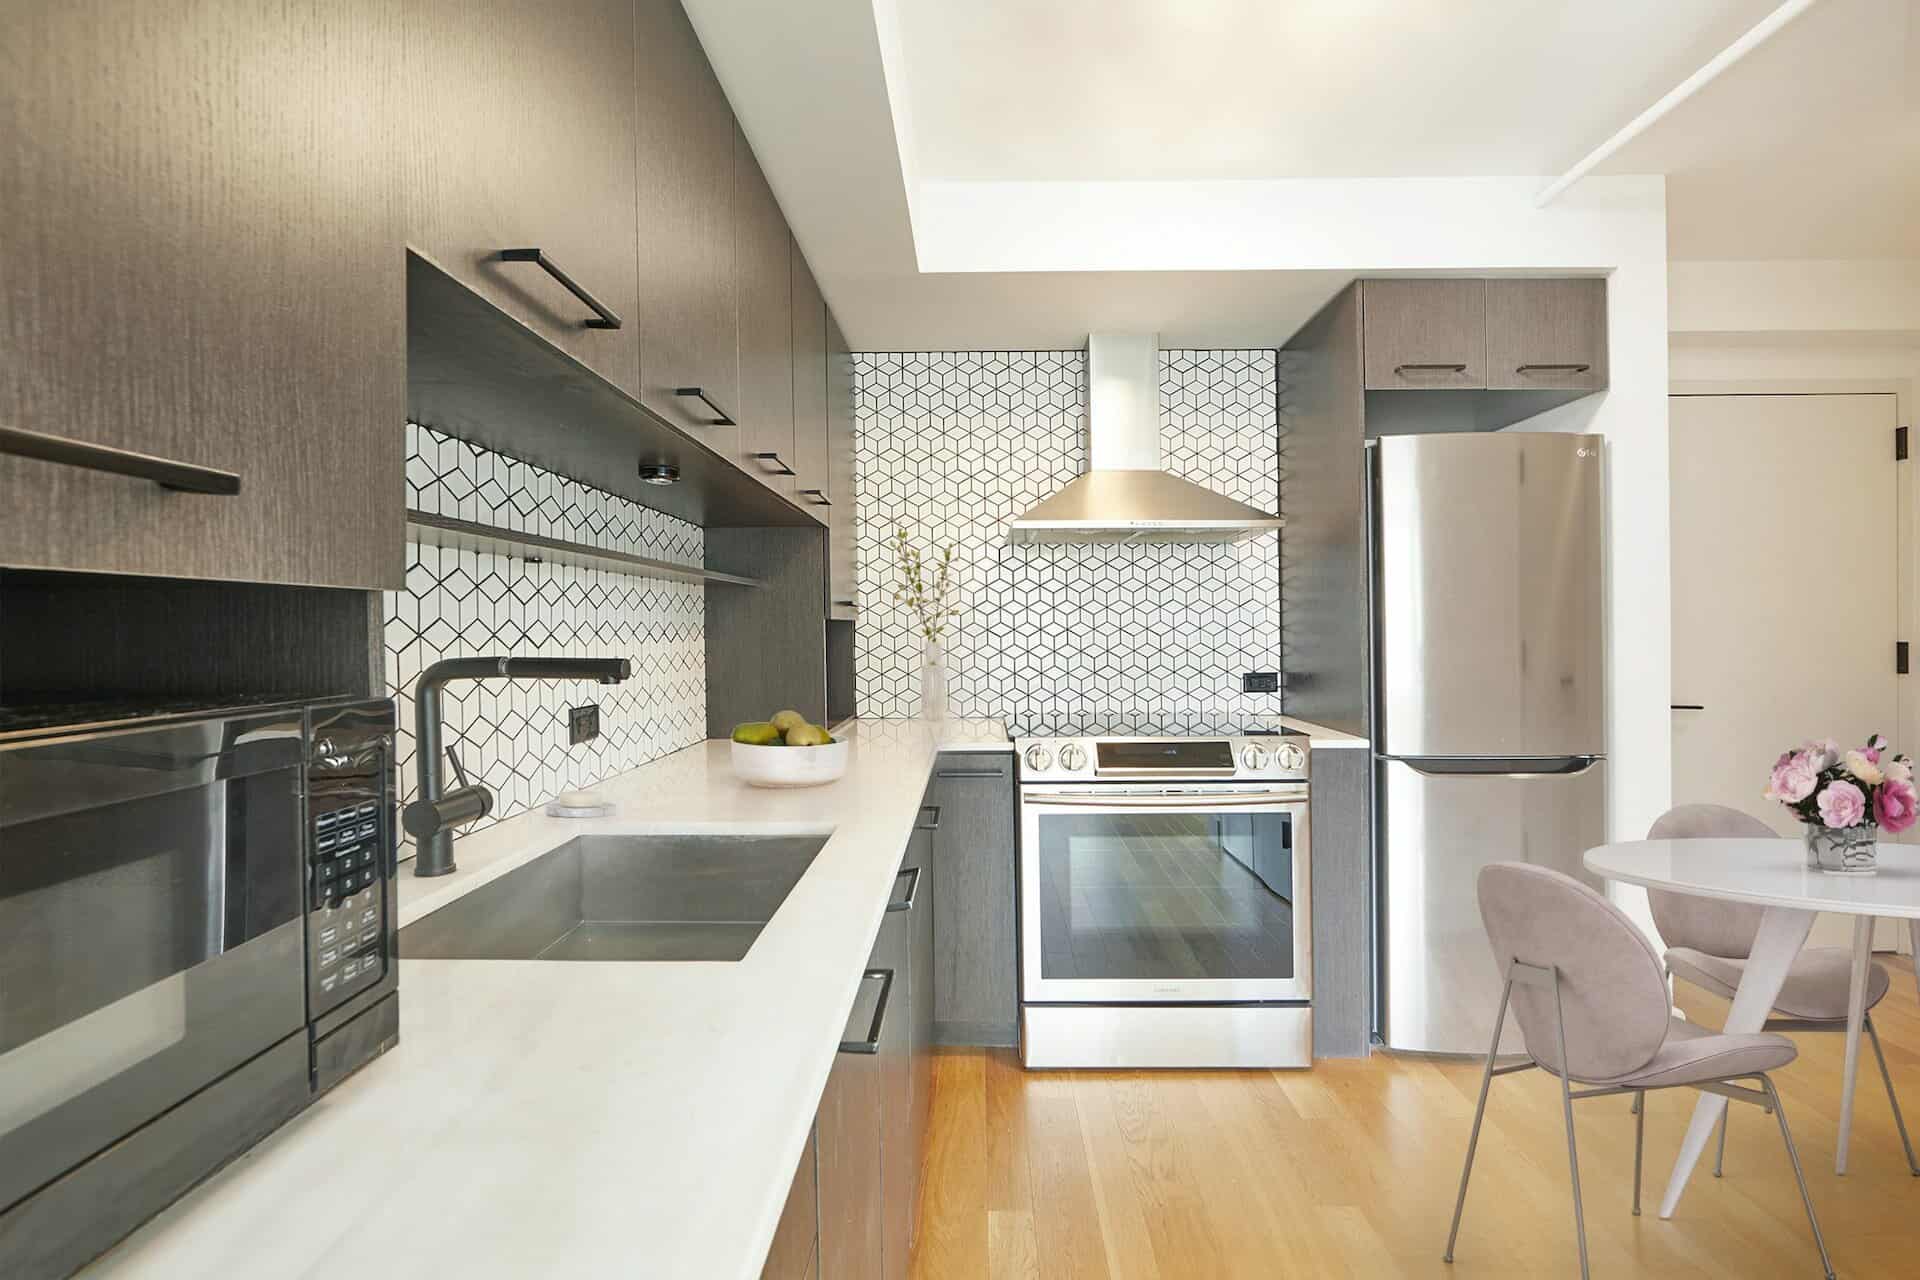 Kitchen at 101 East 10th Street apartments in New York with stainless steel appliances, white countertops & hardwood floors.